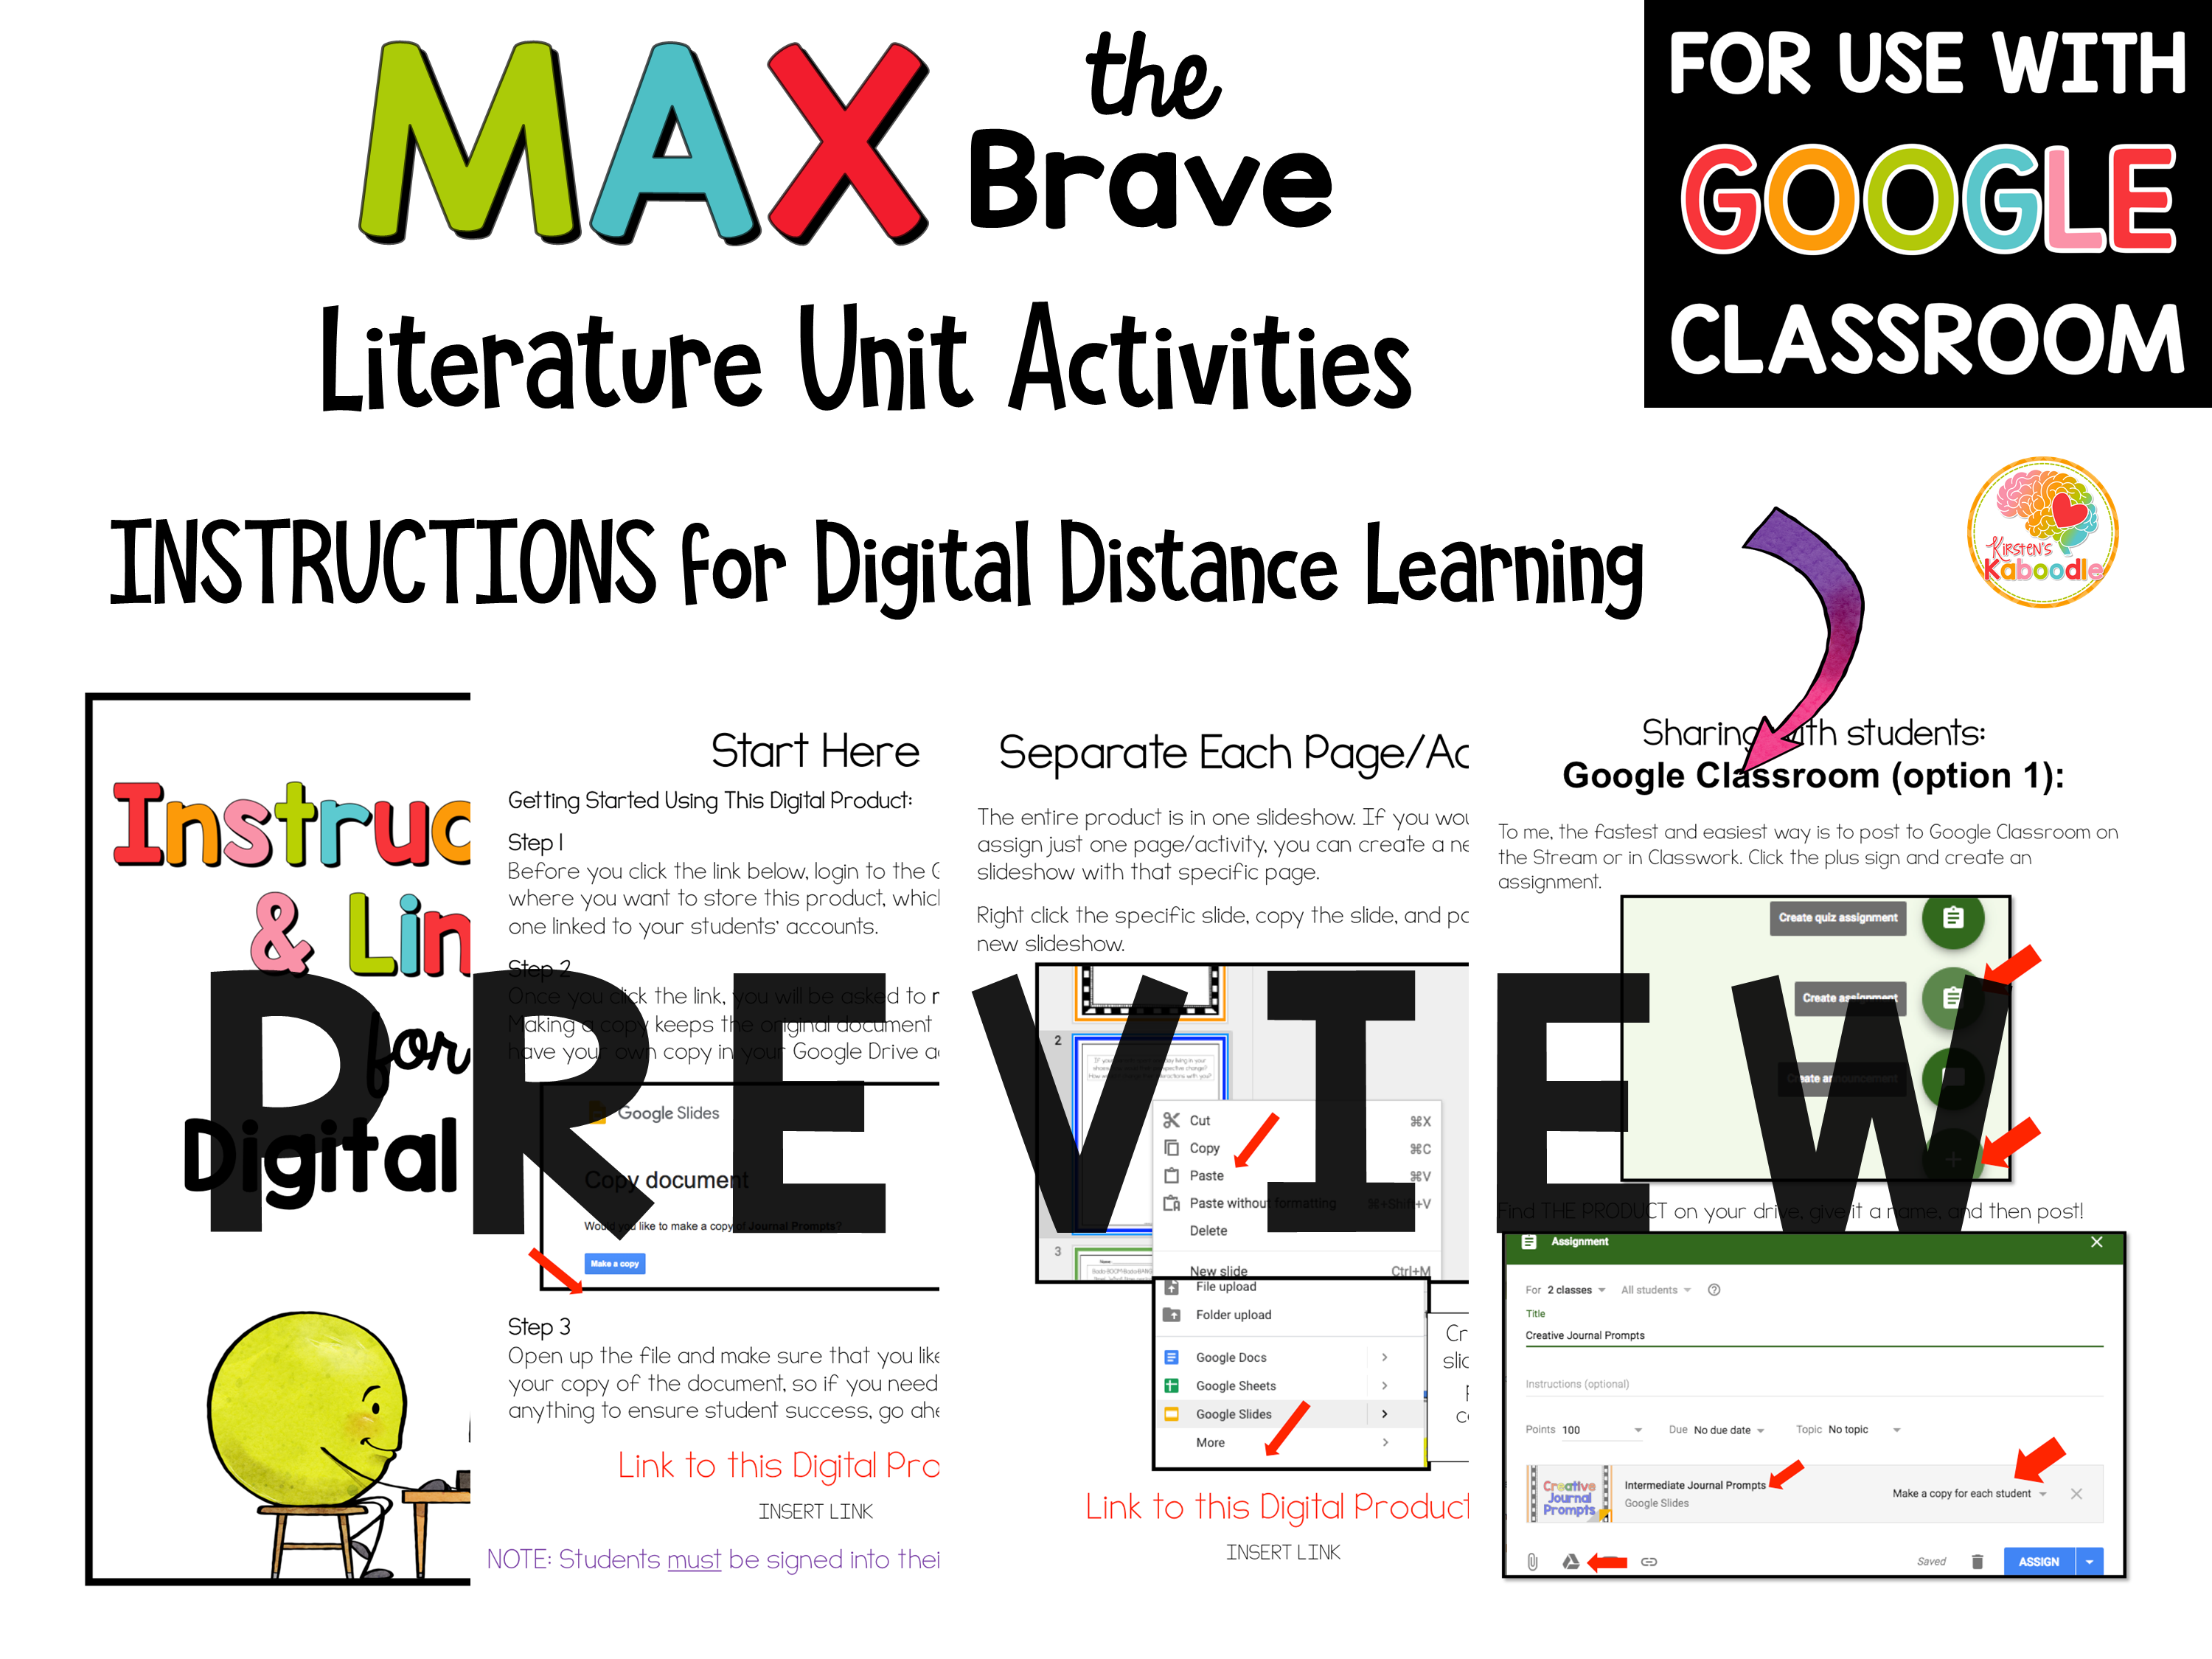 max-the-brave-activities